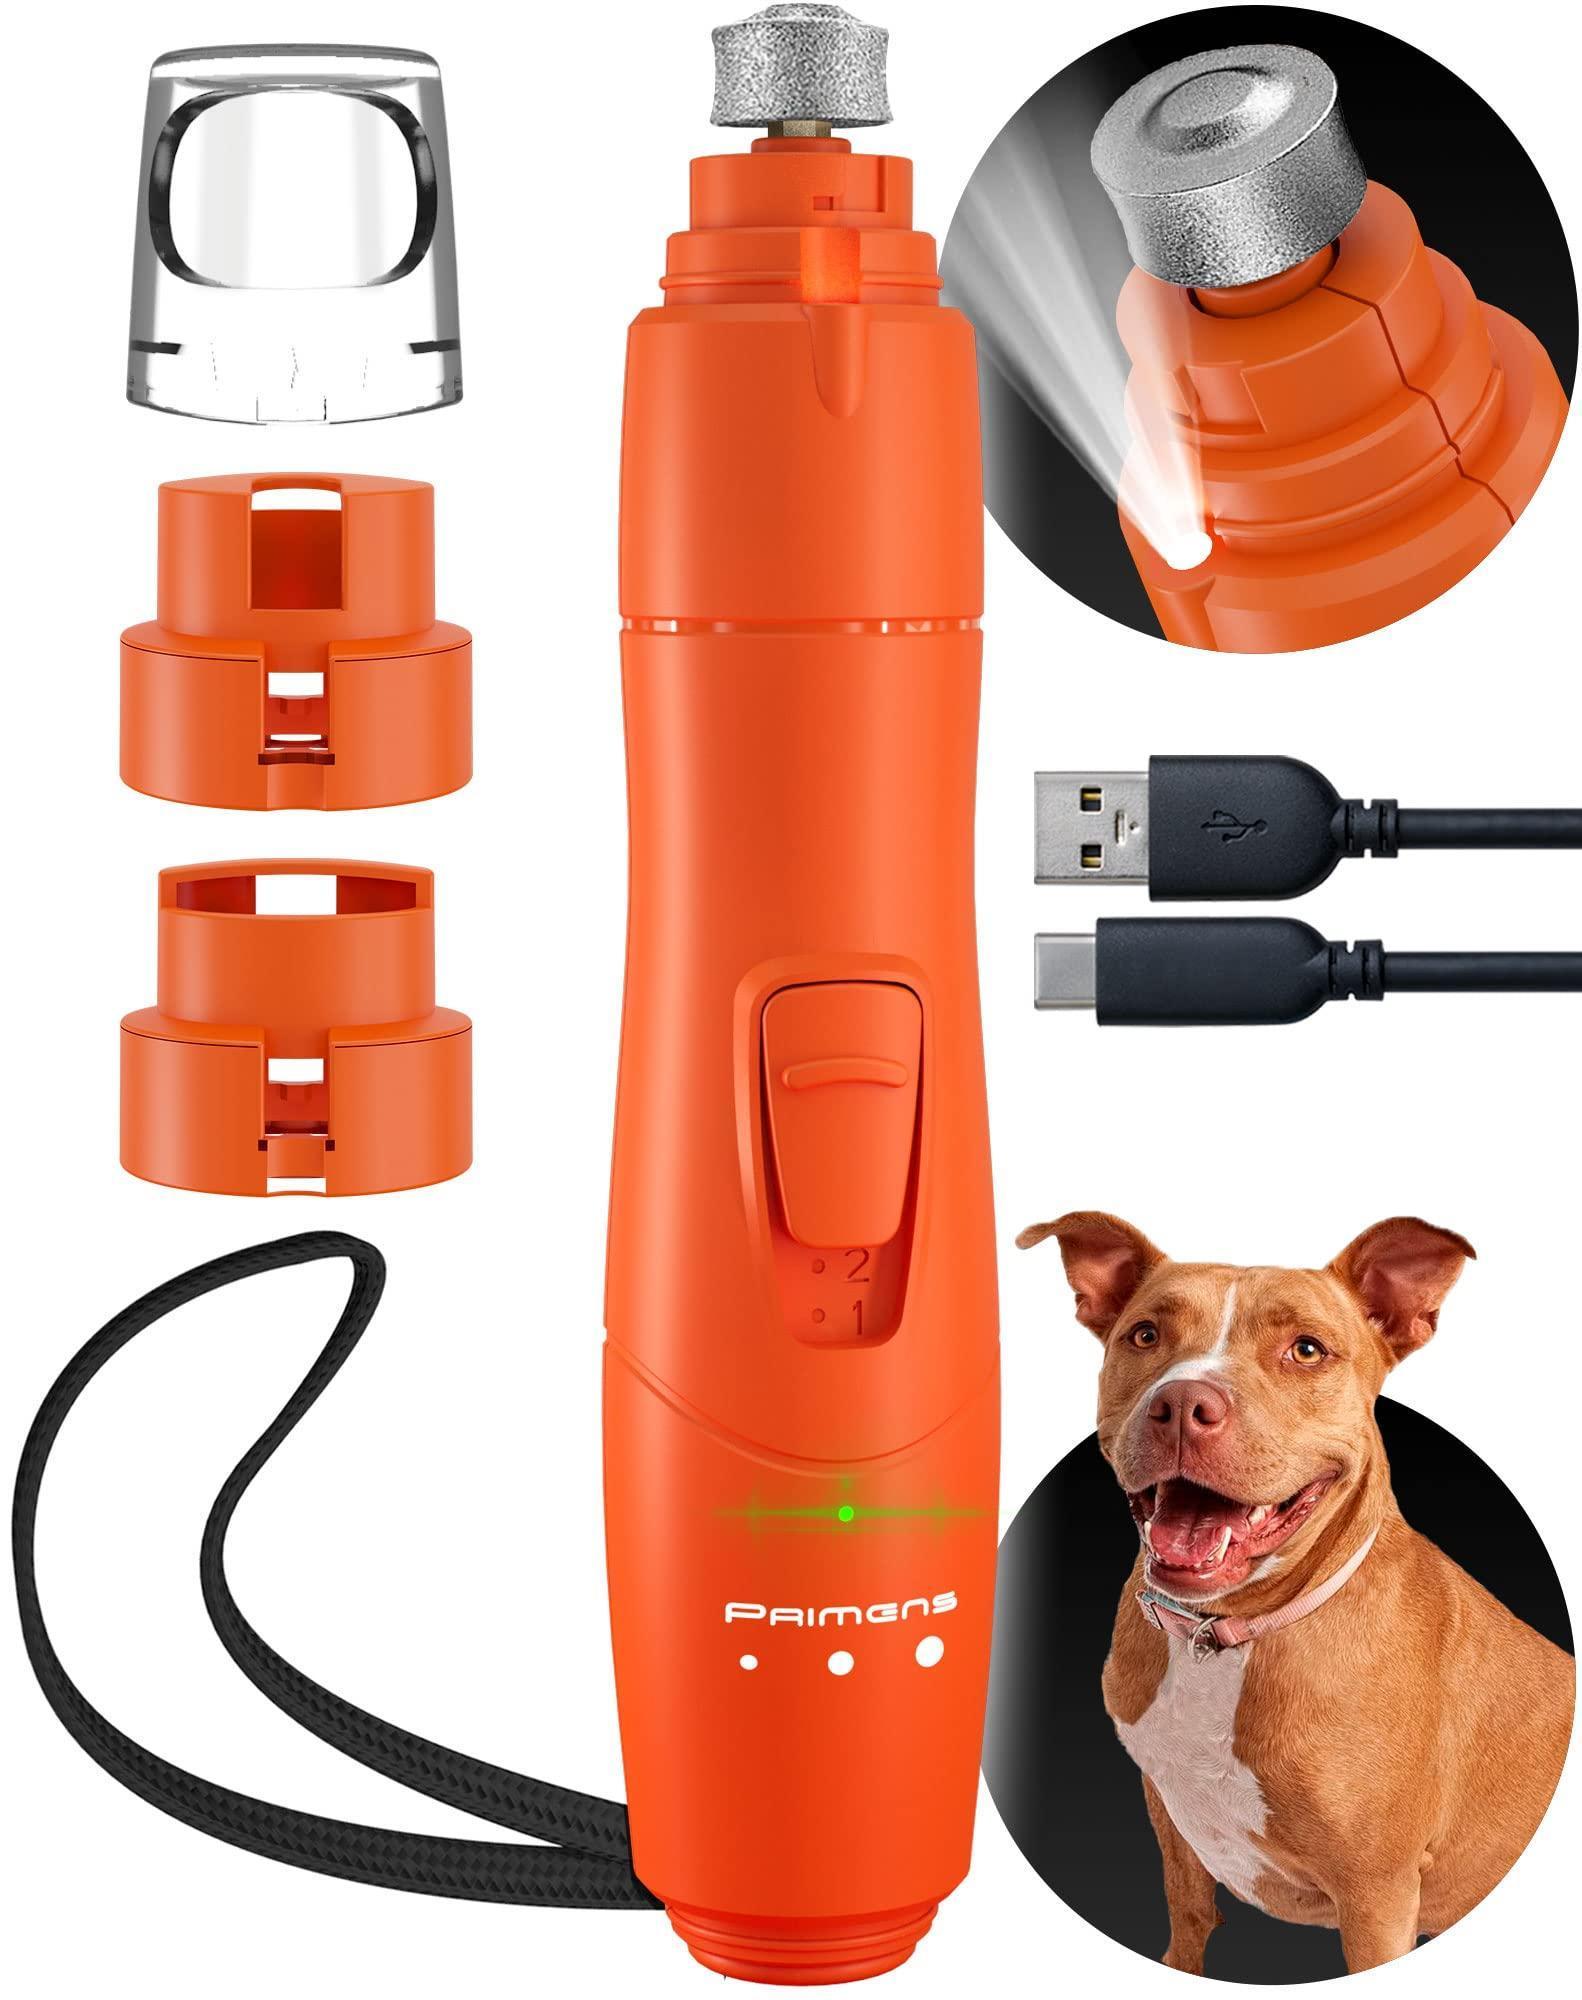 Electric dog nail grinder with USB charger.